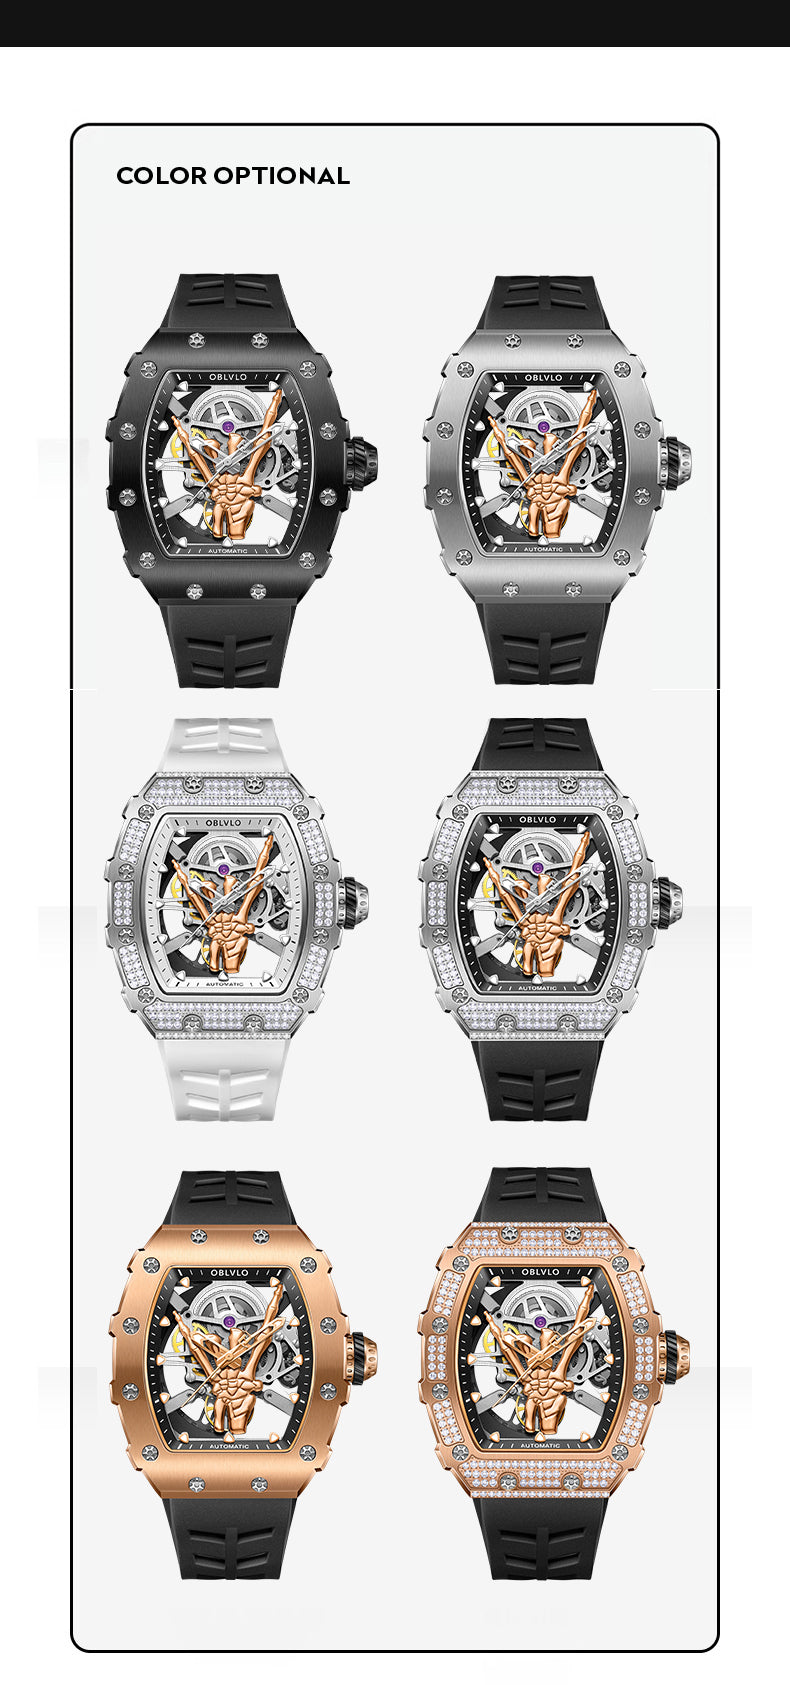 Cool OBLVLO XM FIG Series Luxury Skeleton utomatic Watches